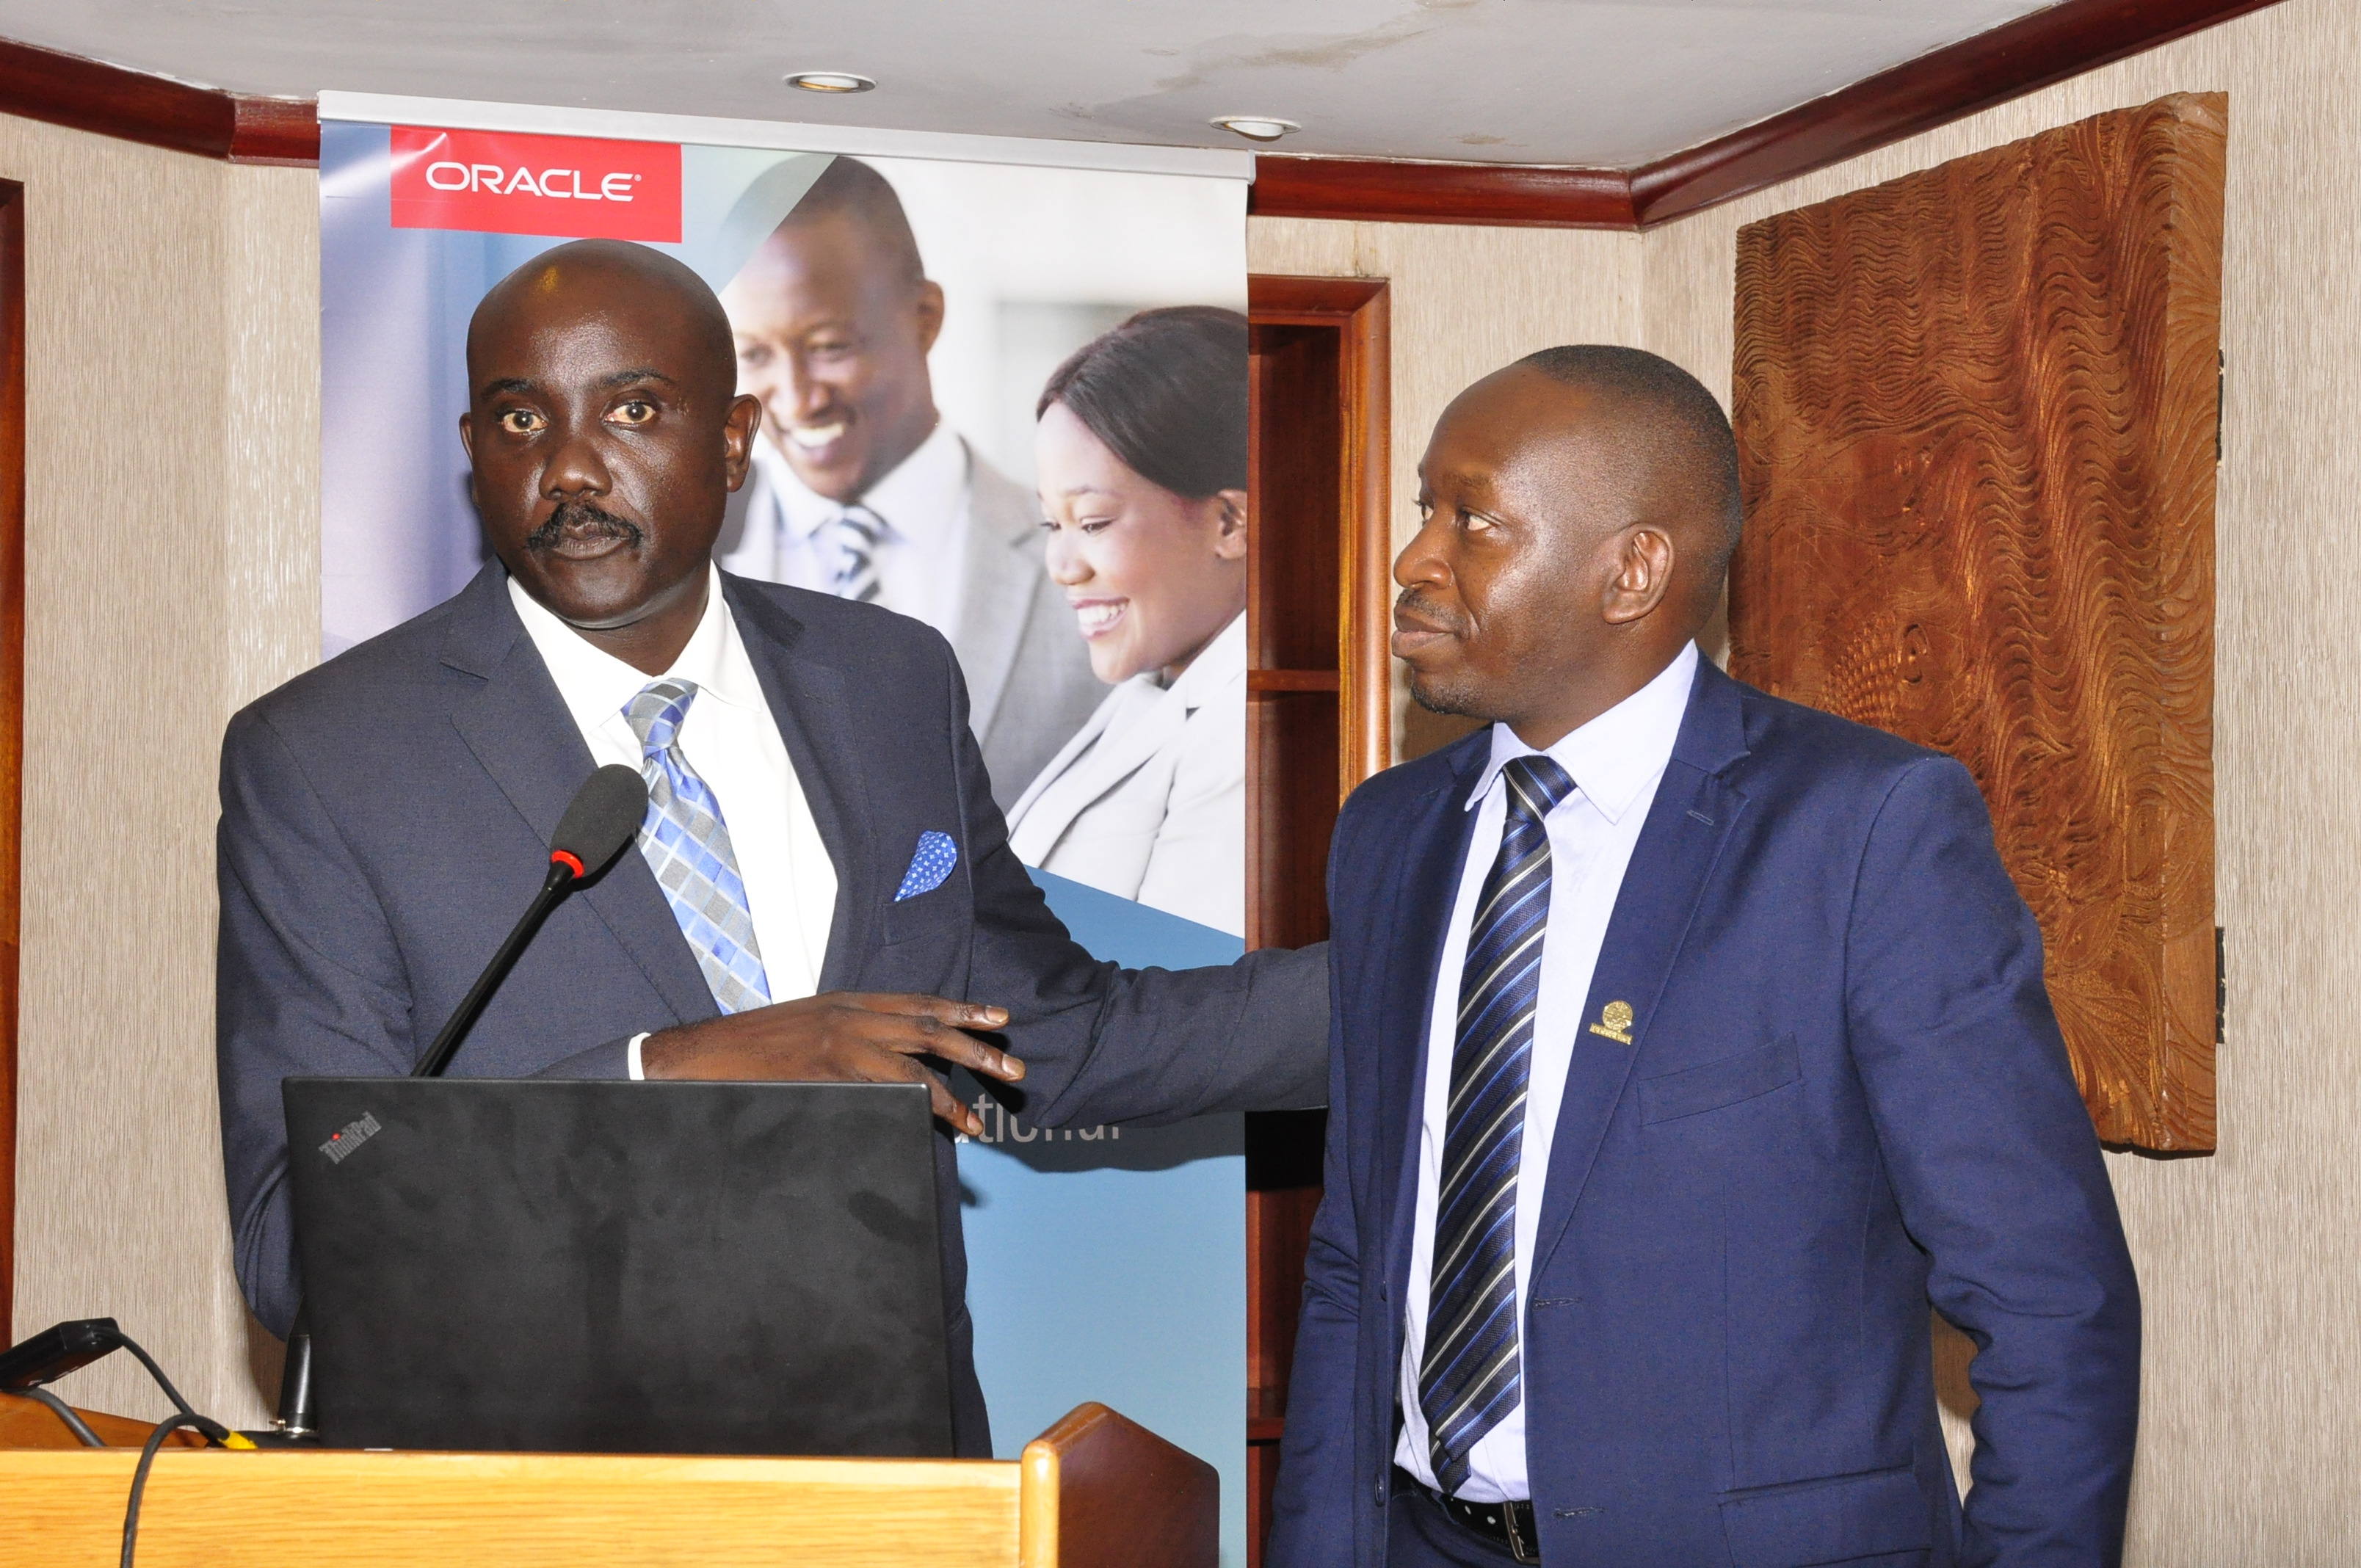 Dr. Tumubweine Twinemanzi, the Executive Director Supervision, at Bank of Uganda (BoU) (L) and Oracle’s Byron Osiro, the Oracle Senior Cloud Platform Manager, East Africa (R) during the first Oracle-Raxio executive roundtable event at Serena Kampala Hotel, on March 6th 2019